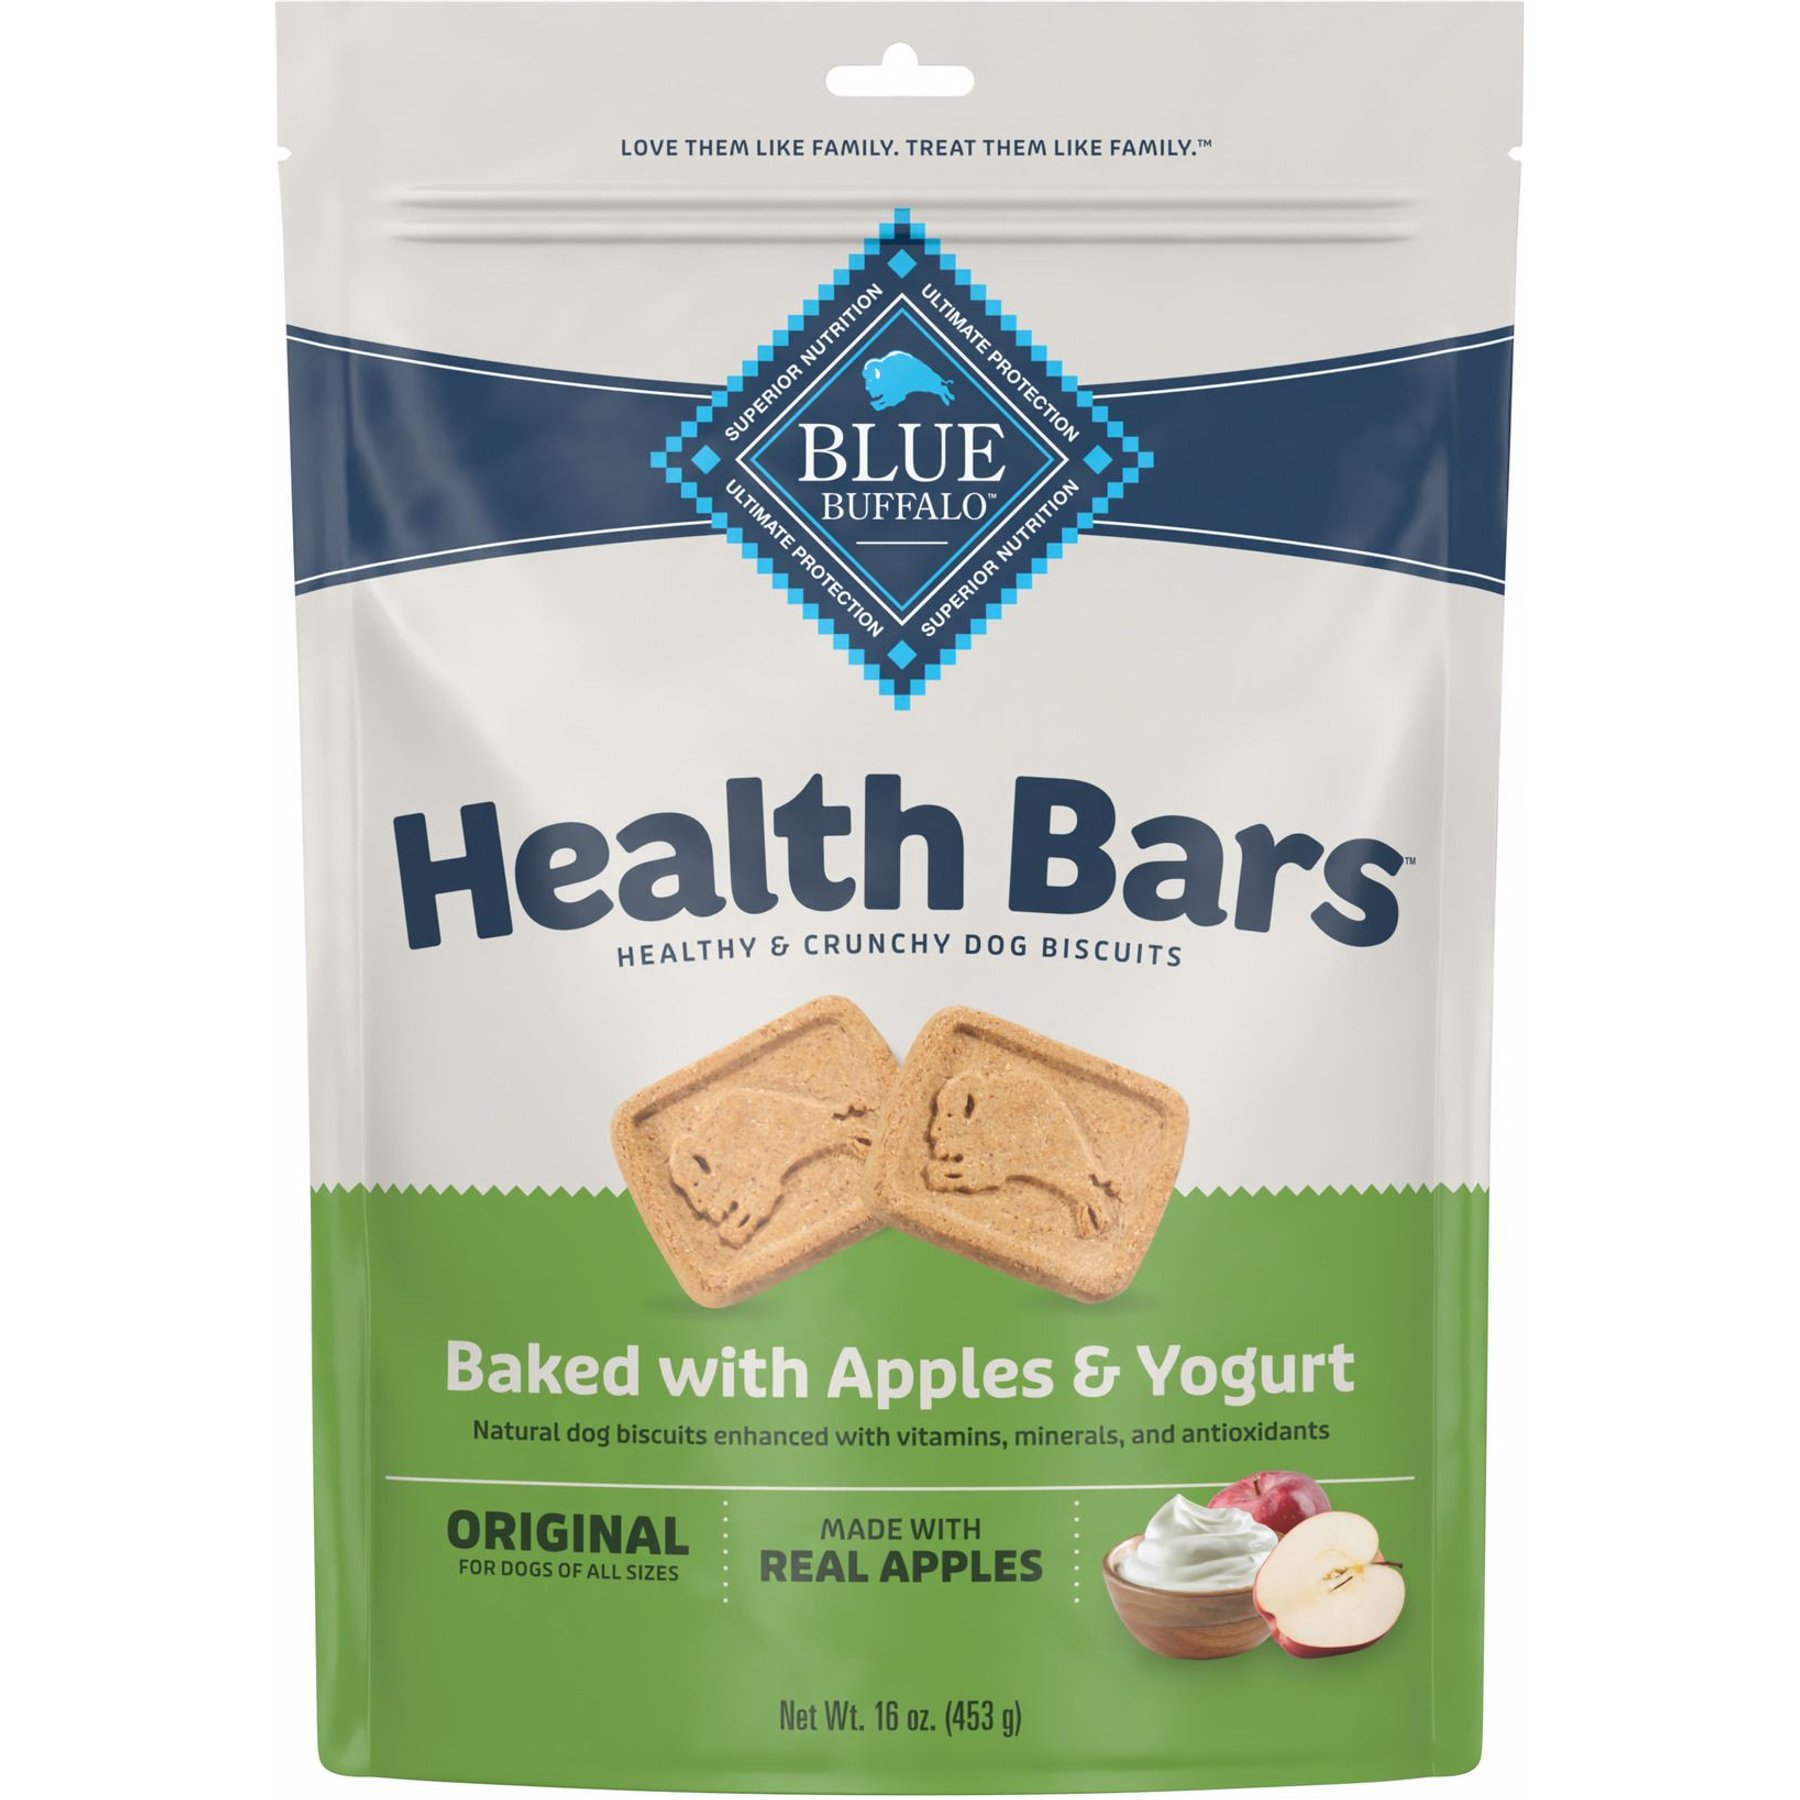 Blue Buffalo Blue Health Bars Biscuits for Dogs, Natural, Original - 16 oz. (453 g)